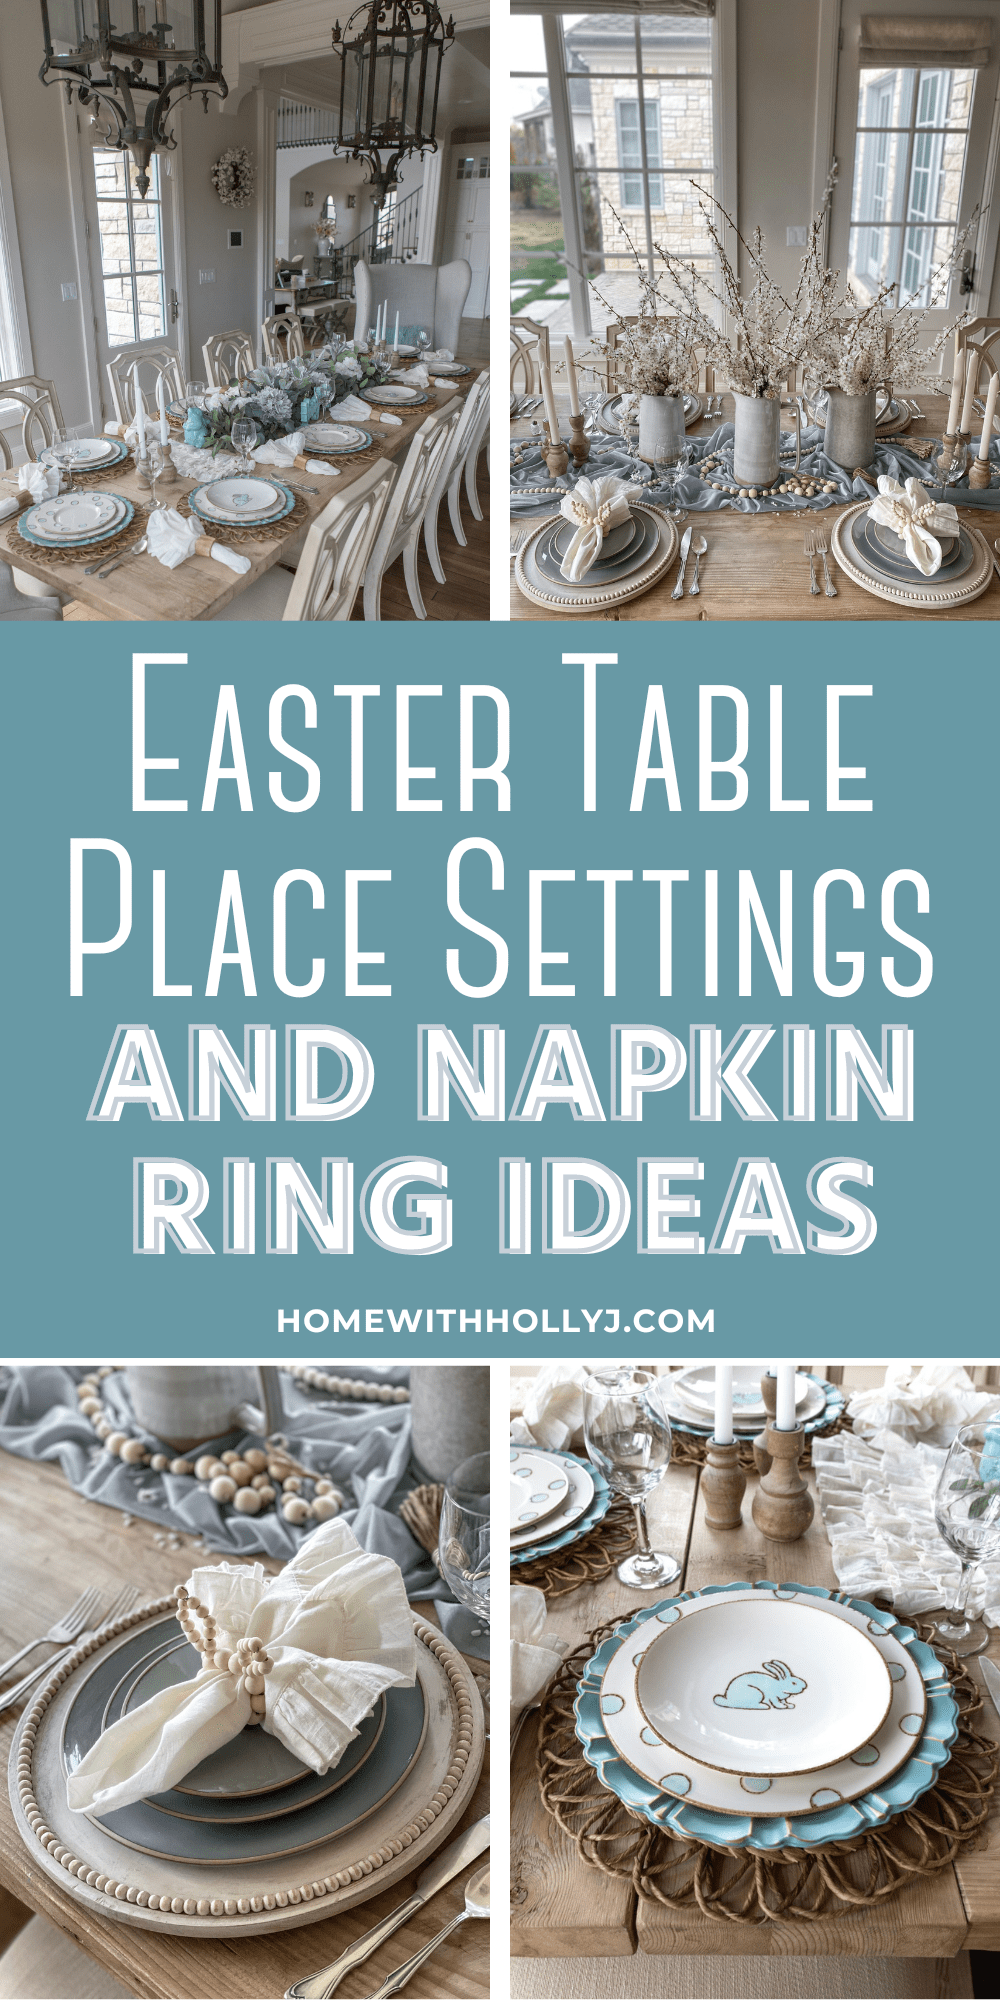 Sharing a variety of Beautiful Easter Tablescape Inspiration pieces sure to pleasantly surprise your guests for the holiday.